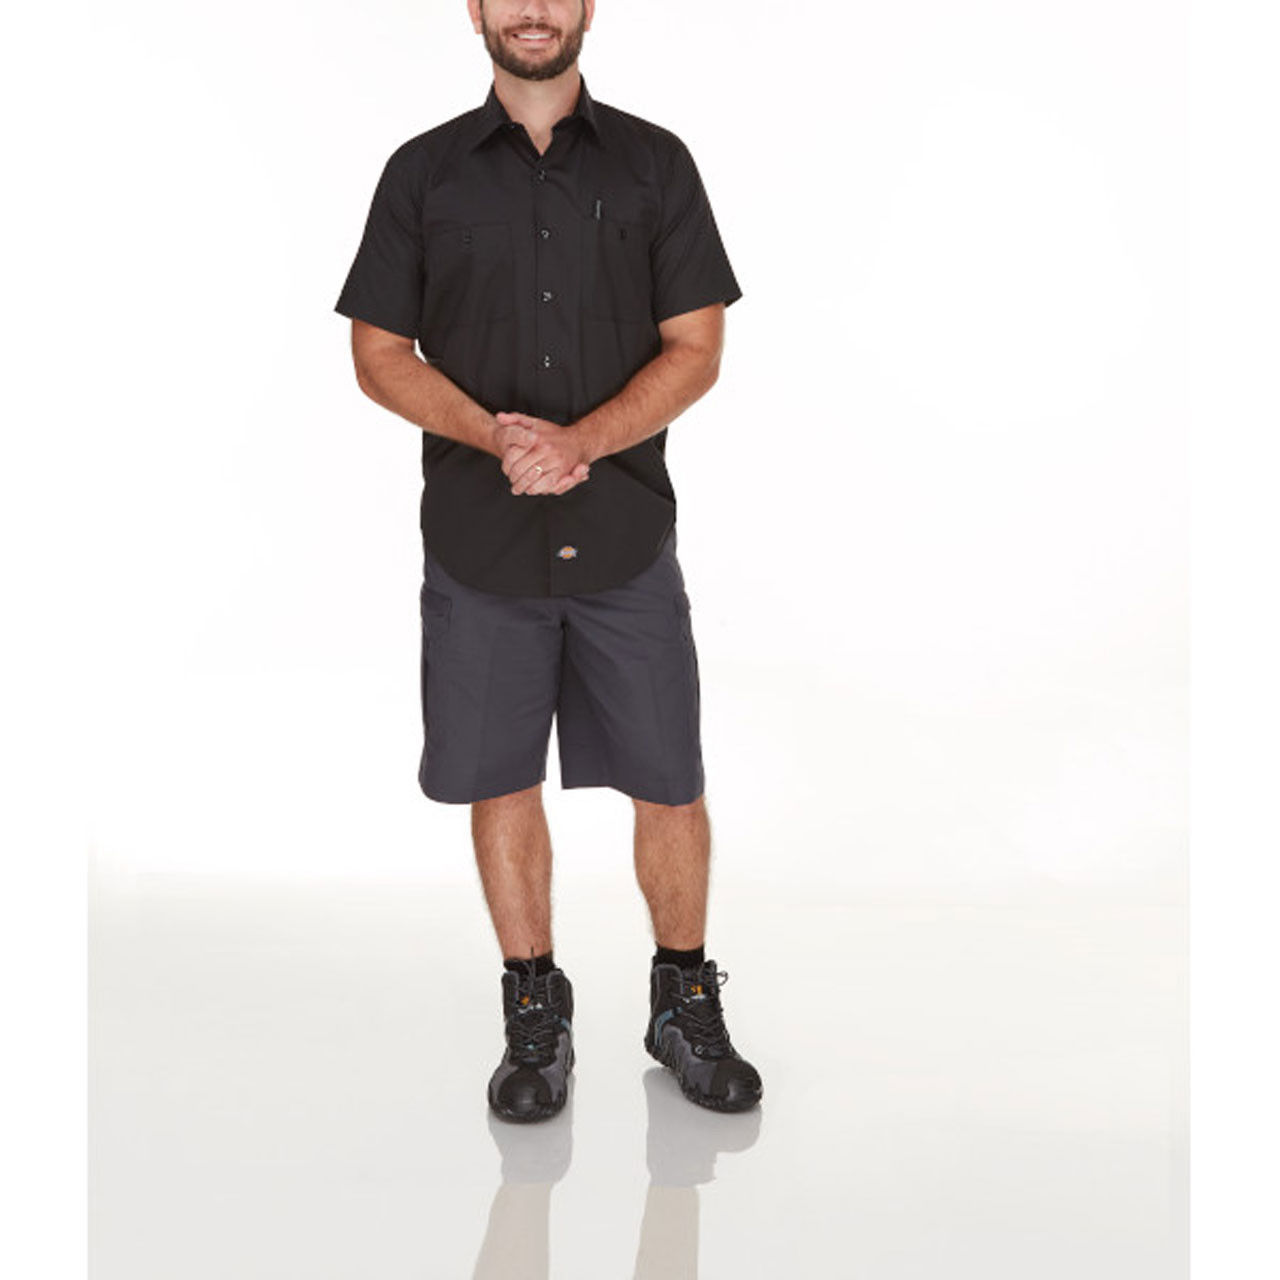 What type of fabric is used in the Dickies LS51 cooling work shirts?